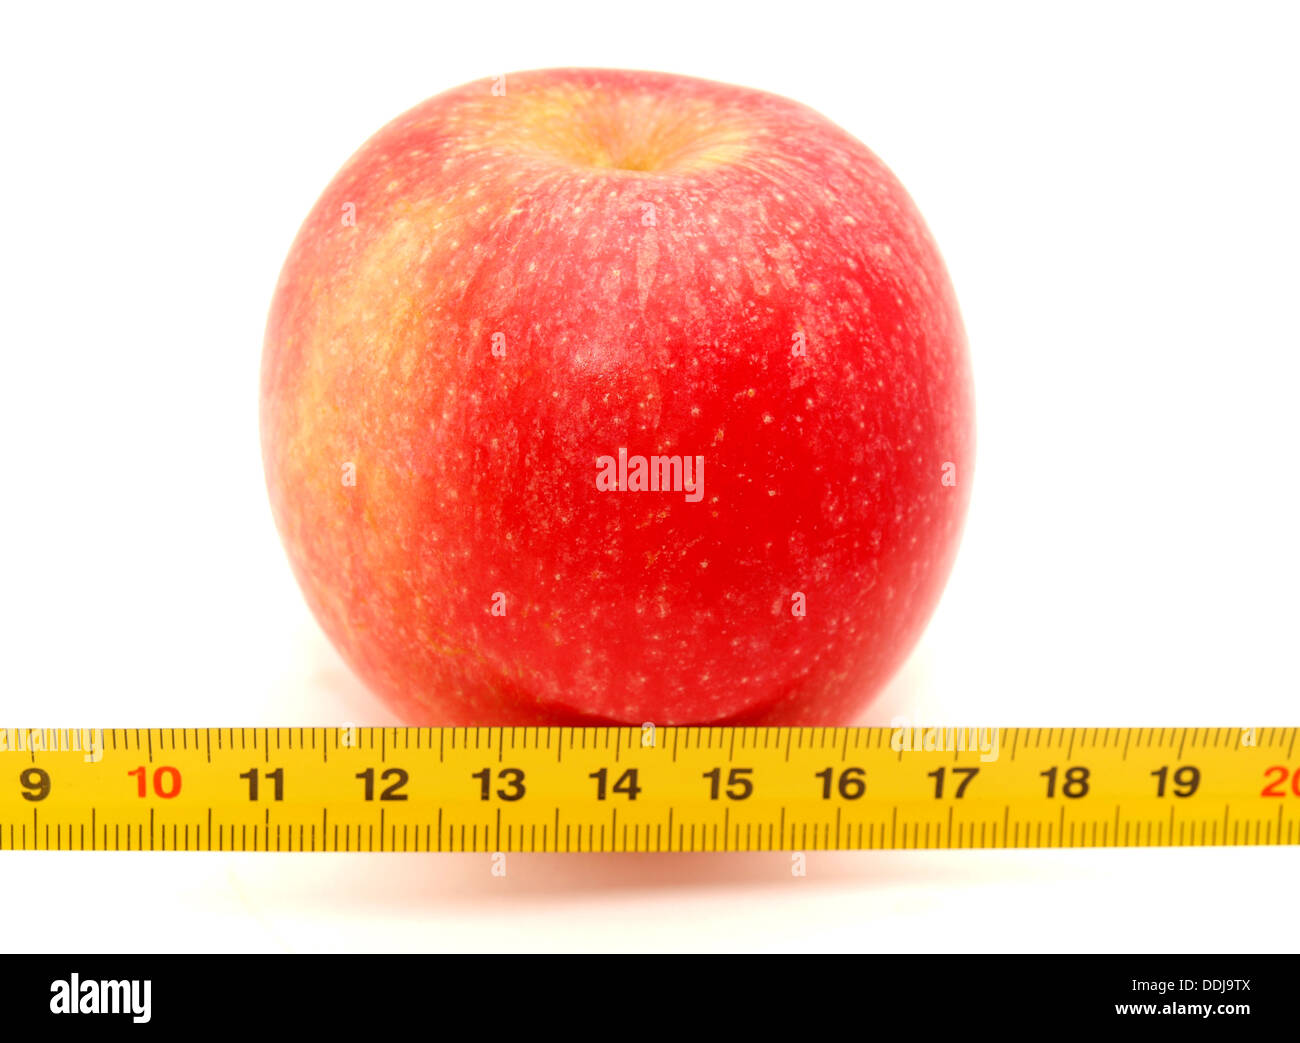 Apple and ruler on a white background Stock Photo